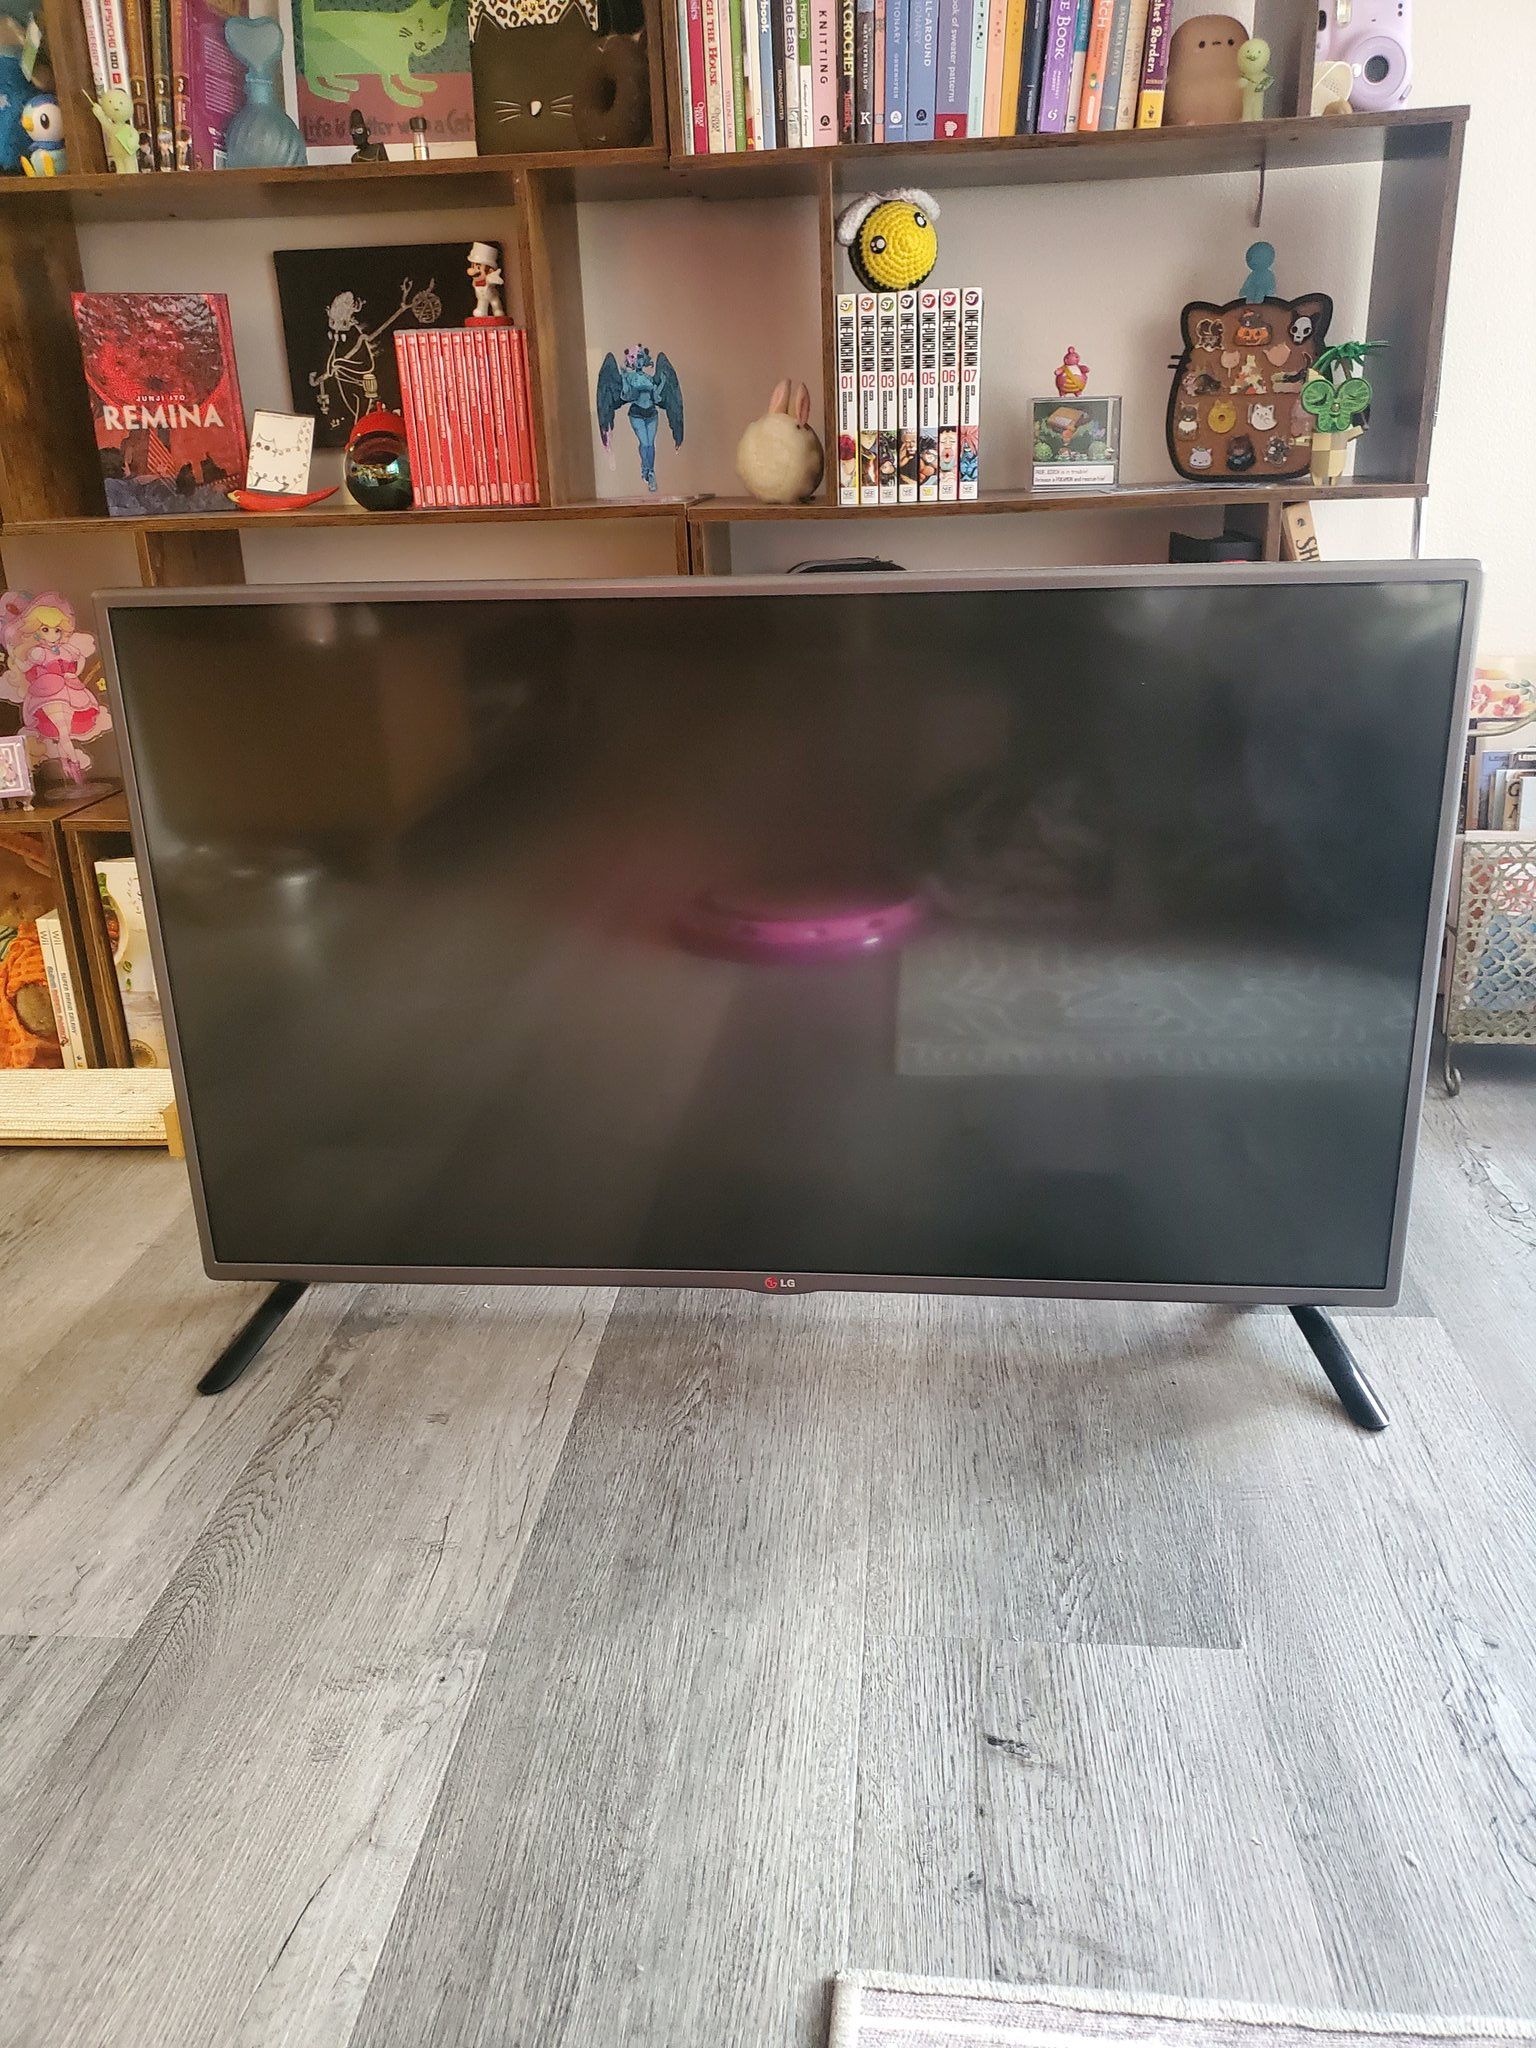 42 Inch LG 42LB5(contact info removed)p TV